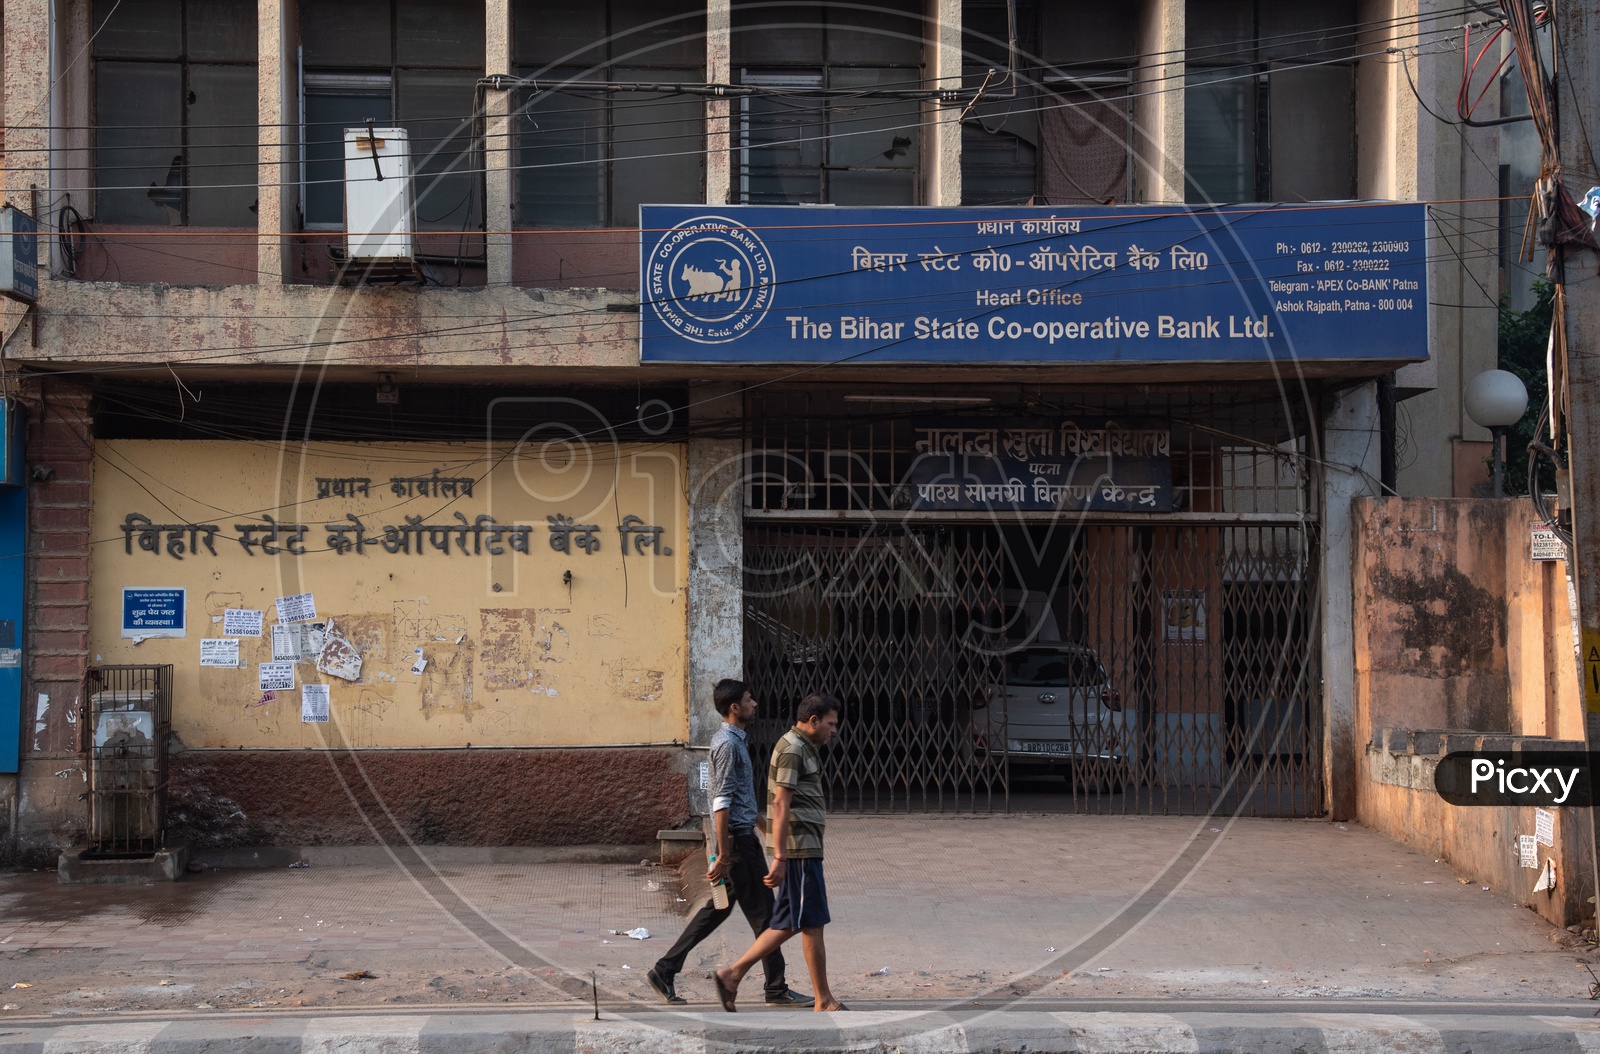 Head Office Of  The Bihar State  Co-operative Bank Ltd  In Patna City